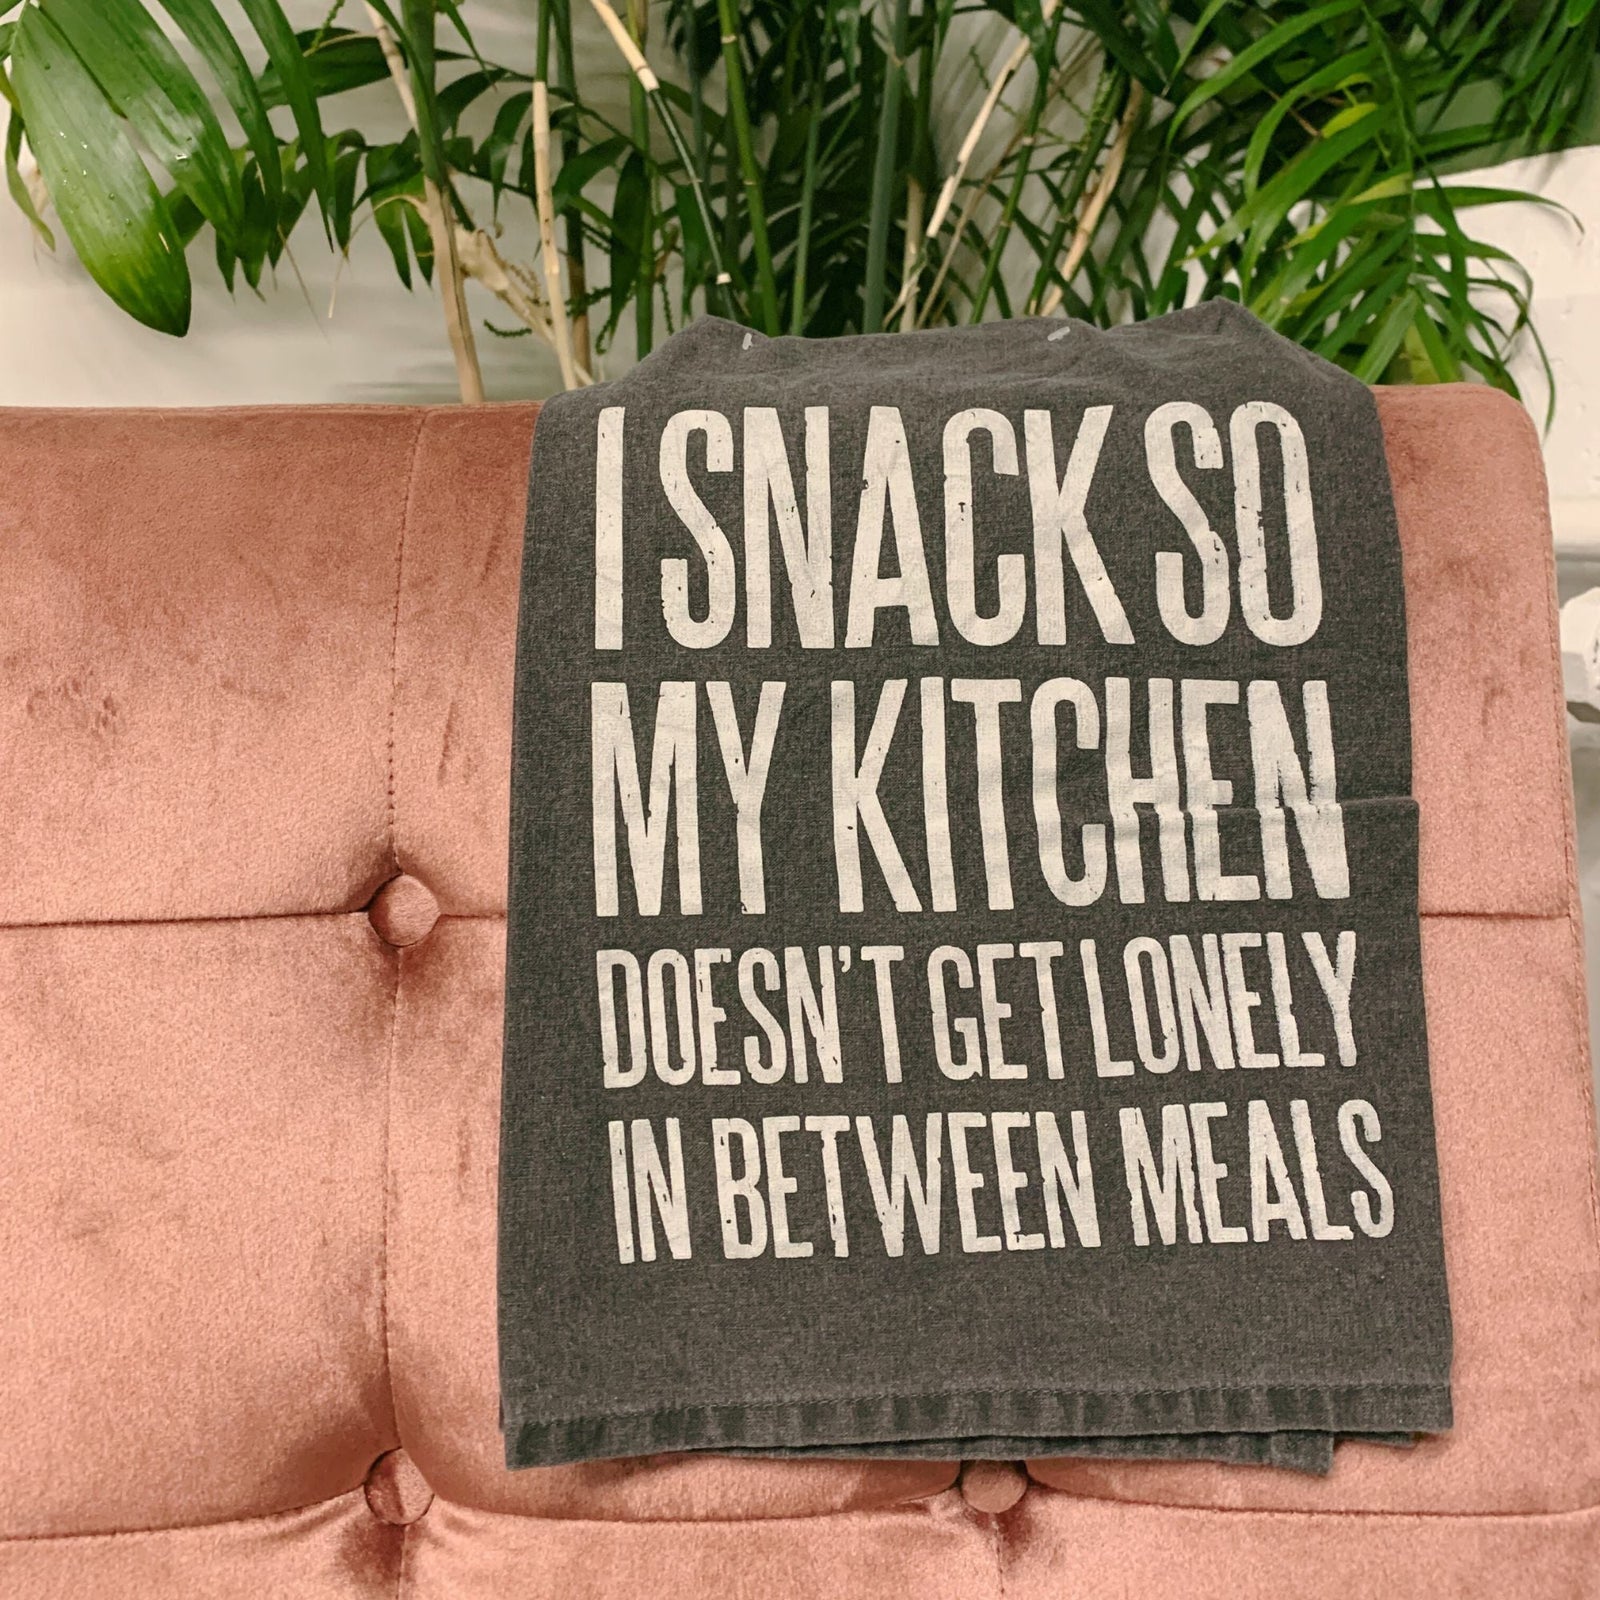 I Snack So My Kitchen Doesn't Get Lonely Dish Cloth Towel | Novelty Silly Tea Towels | Hilarious Kitchen Hand Towel | 28" x 28"